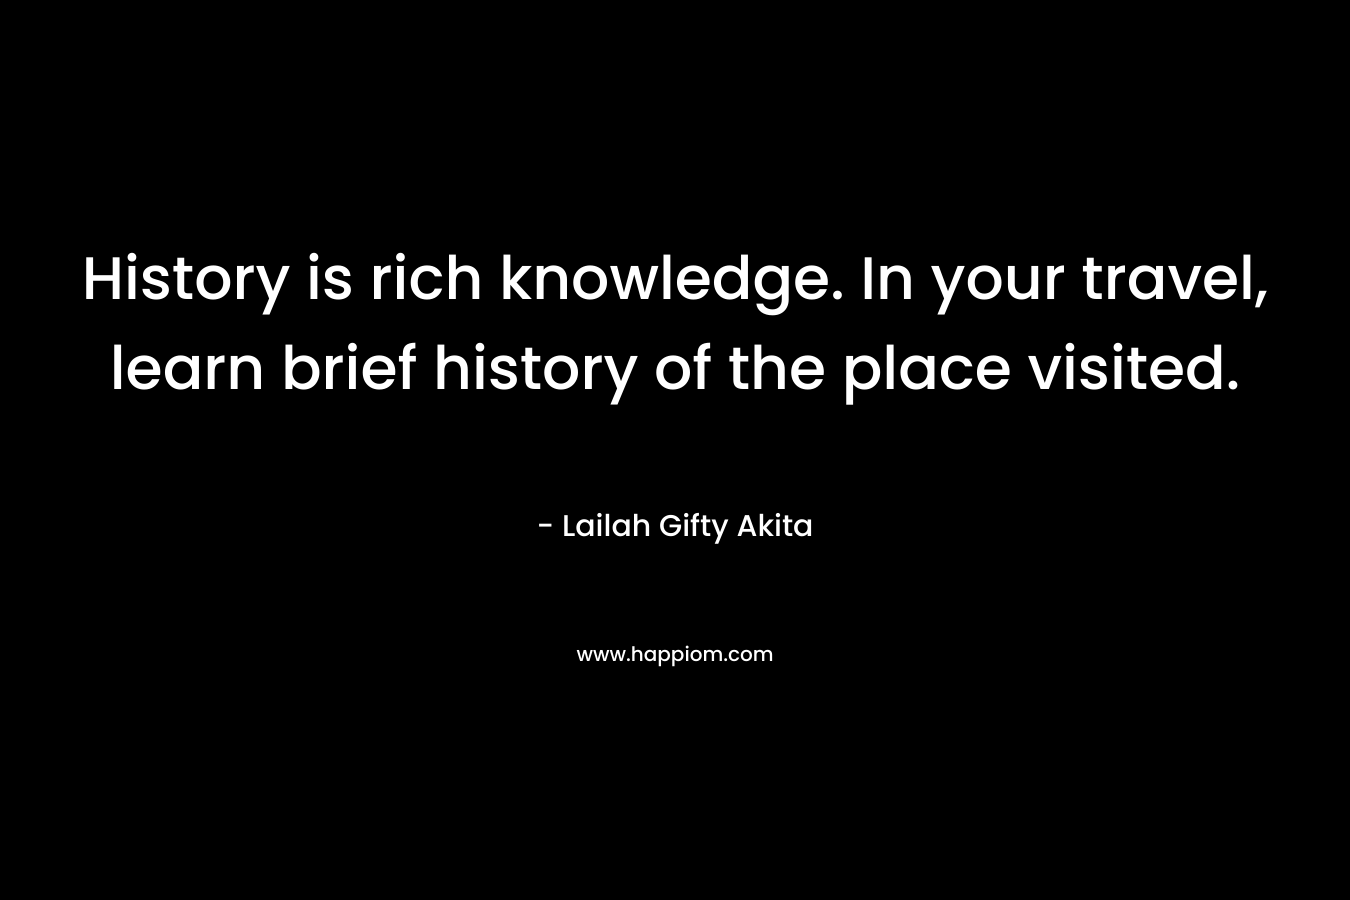 History is rich knowledge. In your travel, learn brief history of the place visited. – Lailah Gifty Akita